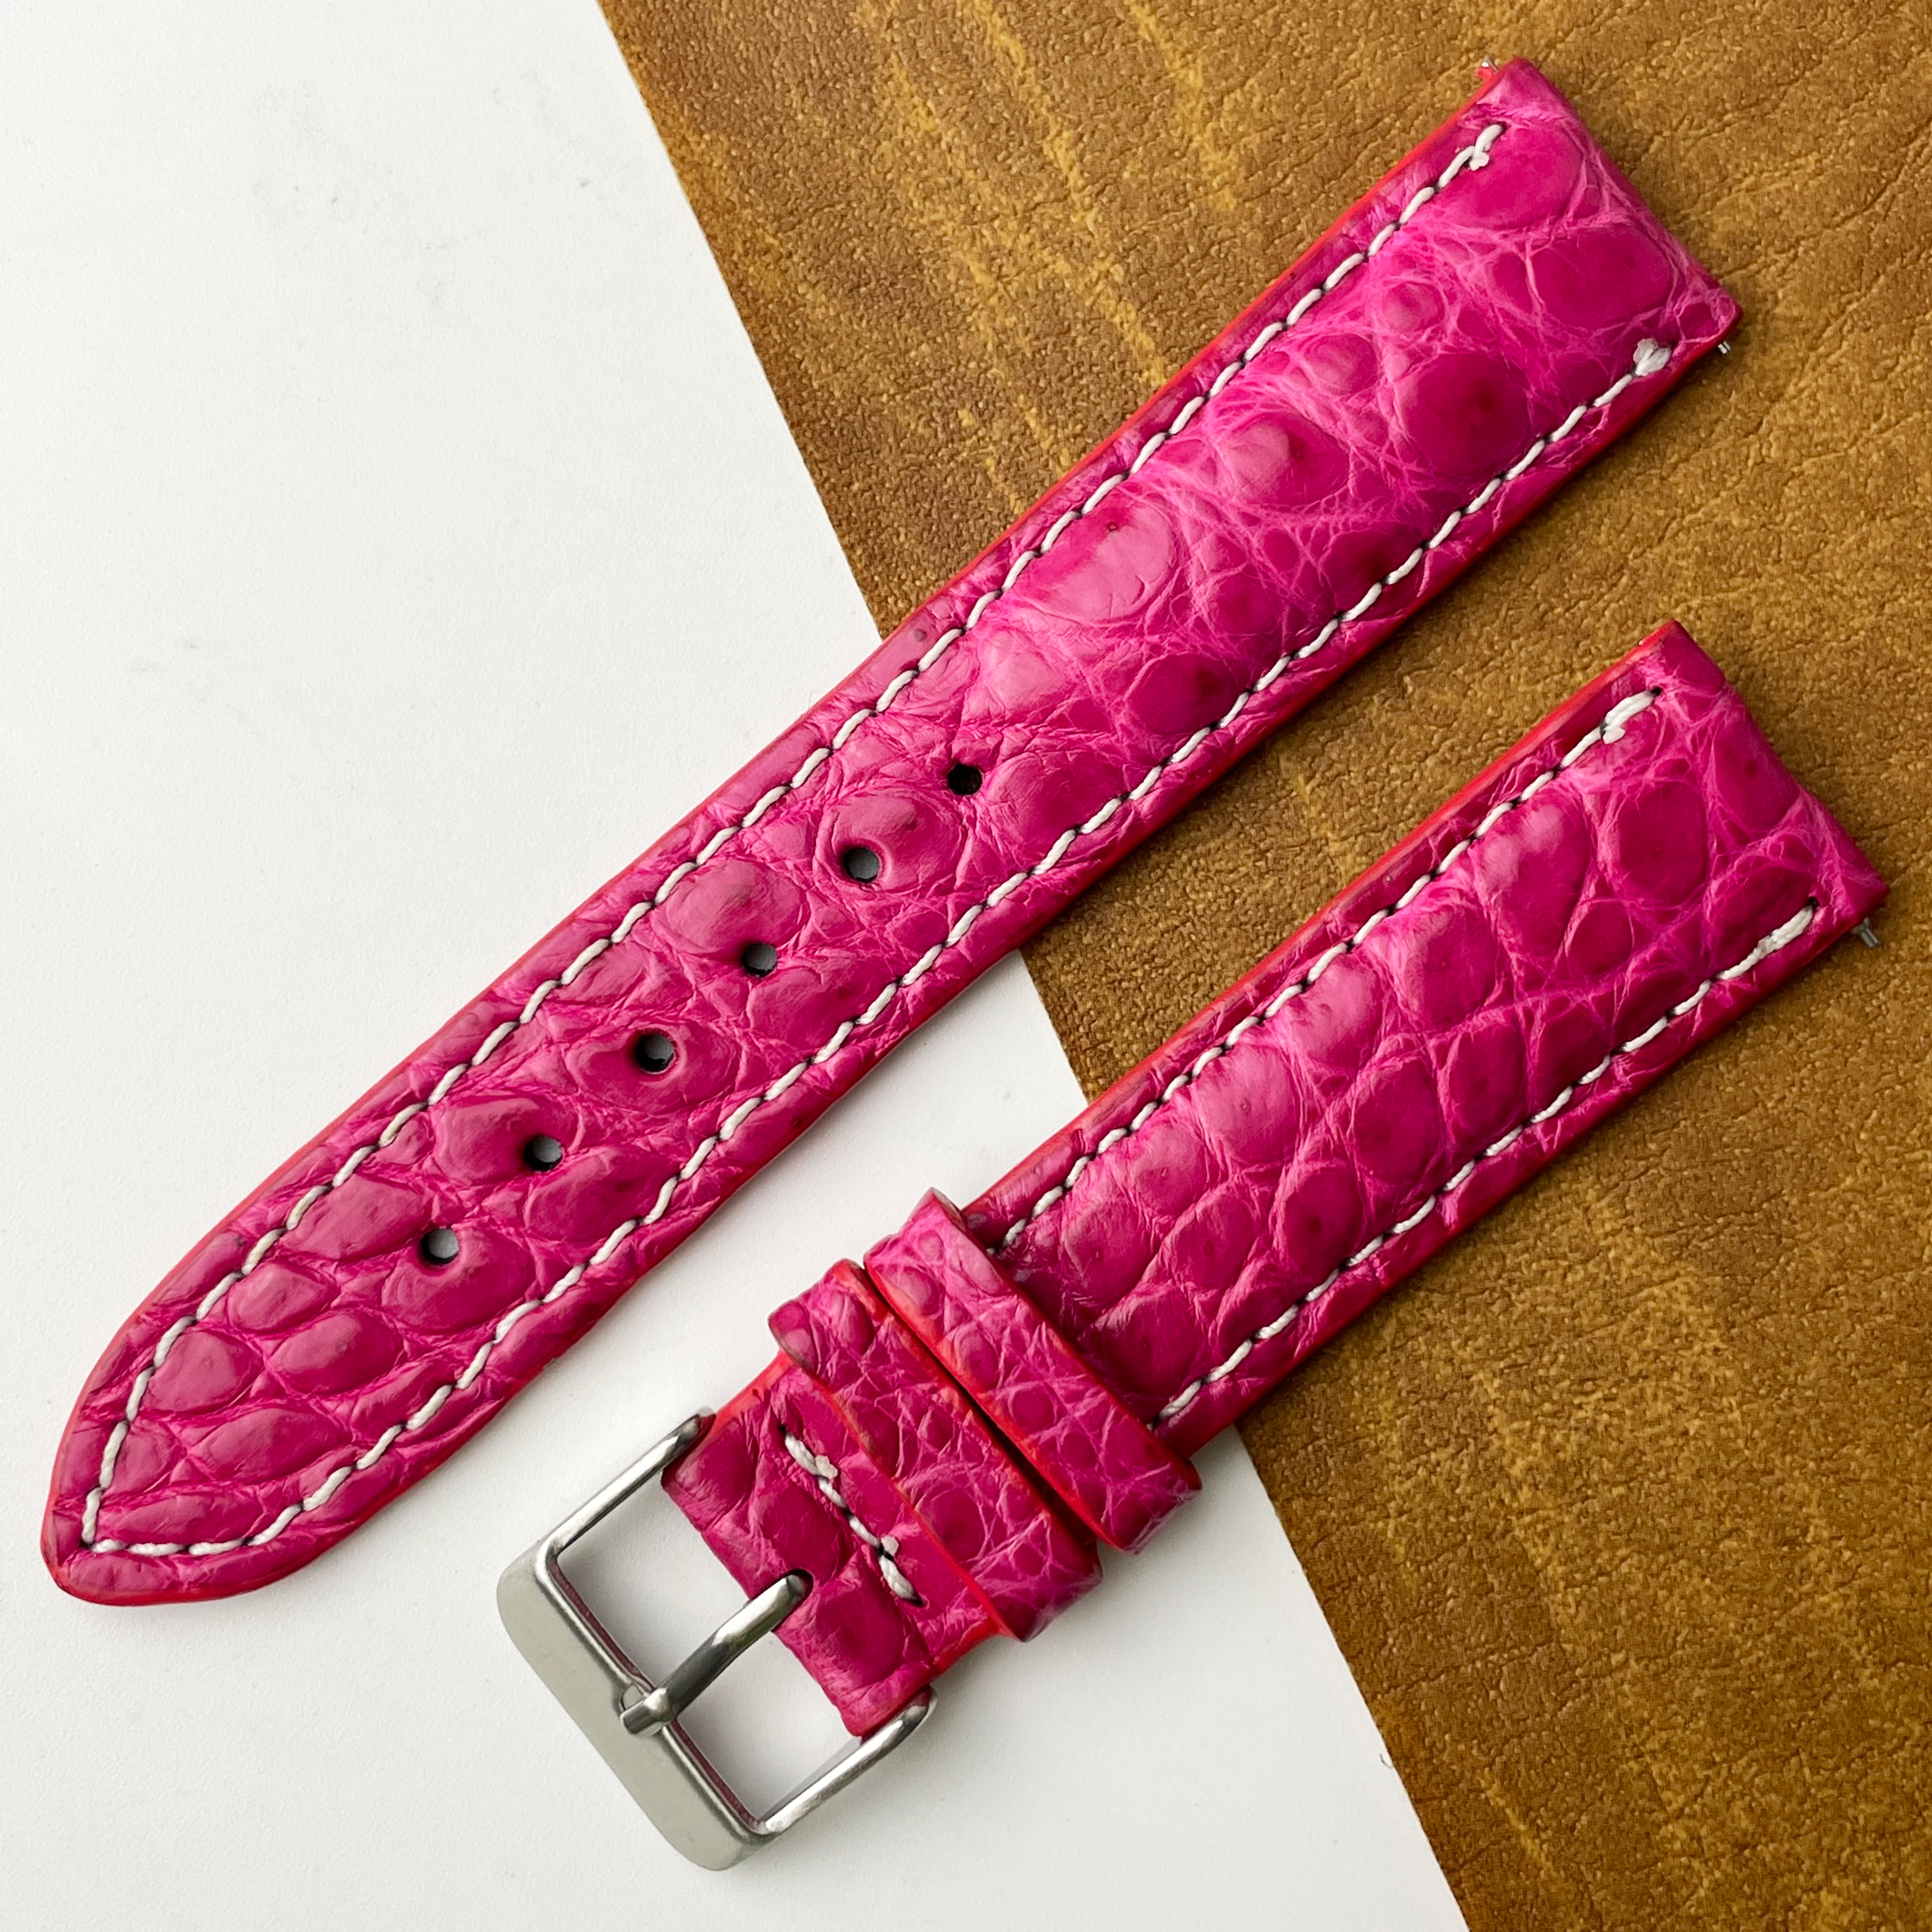 20mm Pink Unique Texture Alligator Watch Band For Men DH-226B